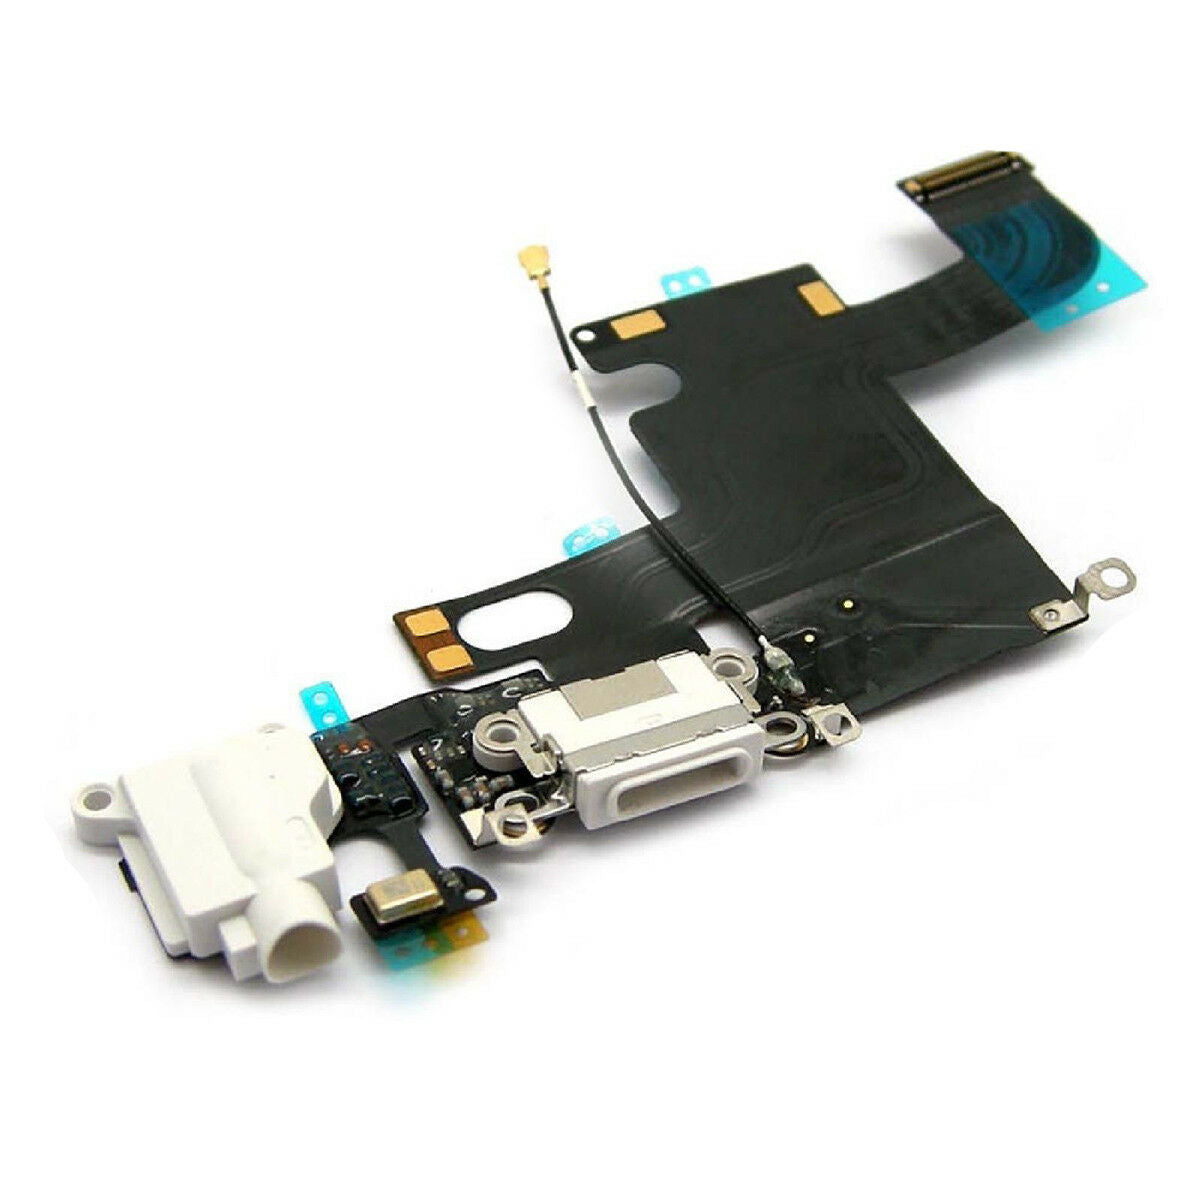 Apple iPhone 6 Charging Port Connector Flex Cable - White for [product_price] - First Help Tech